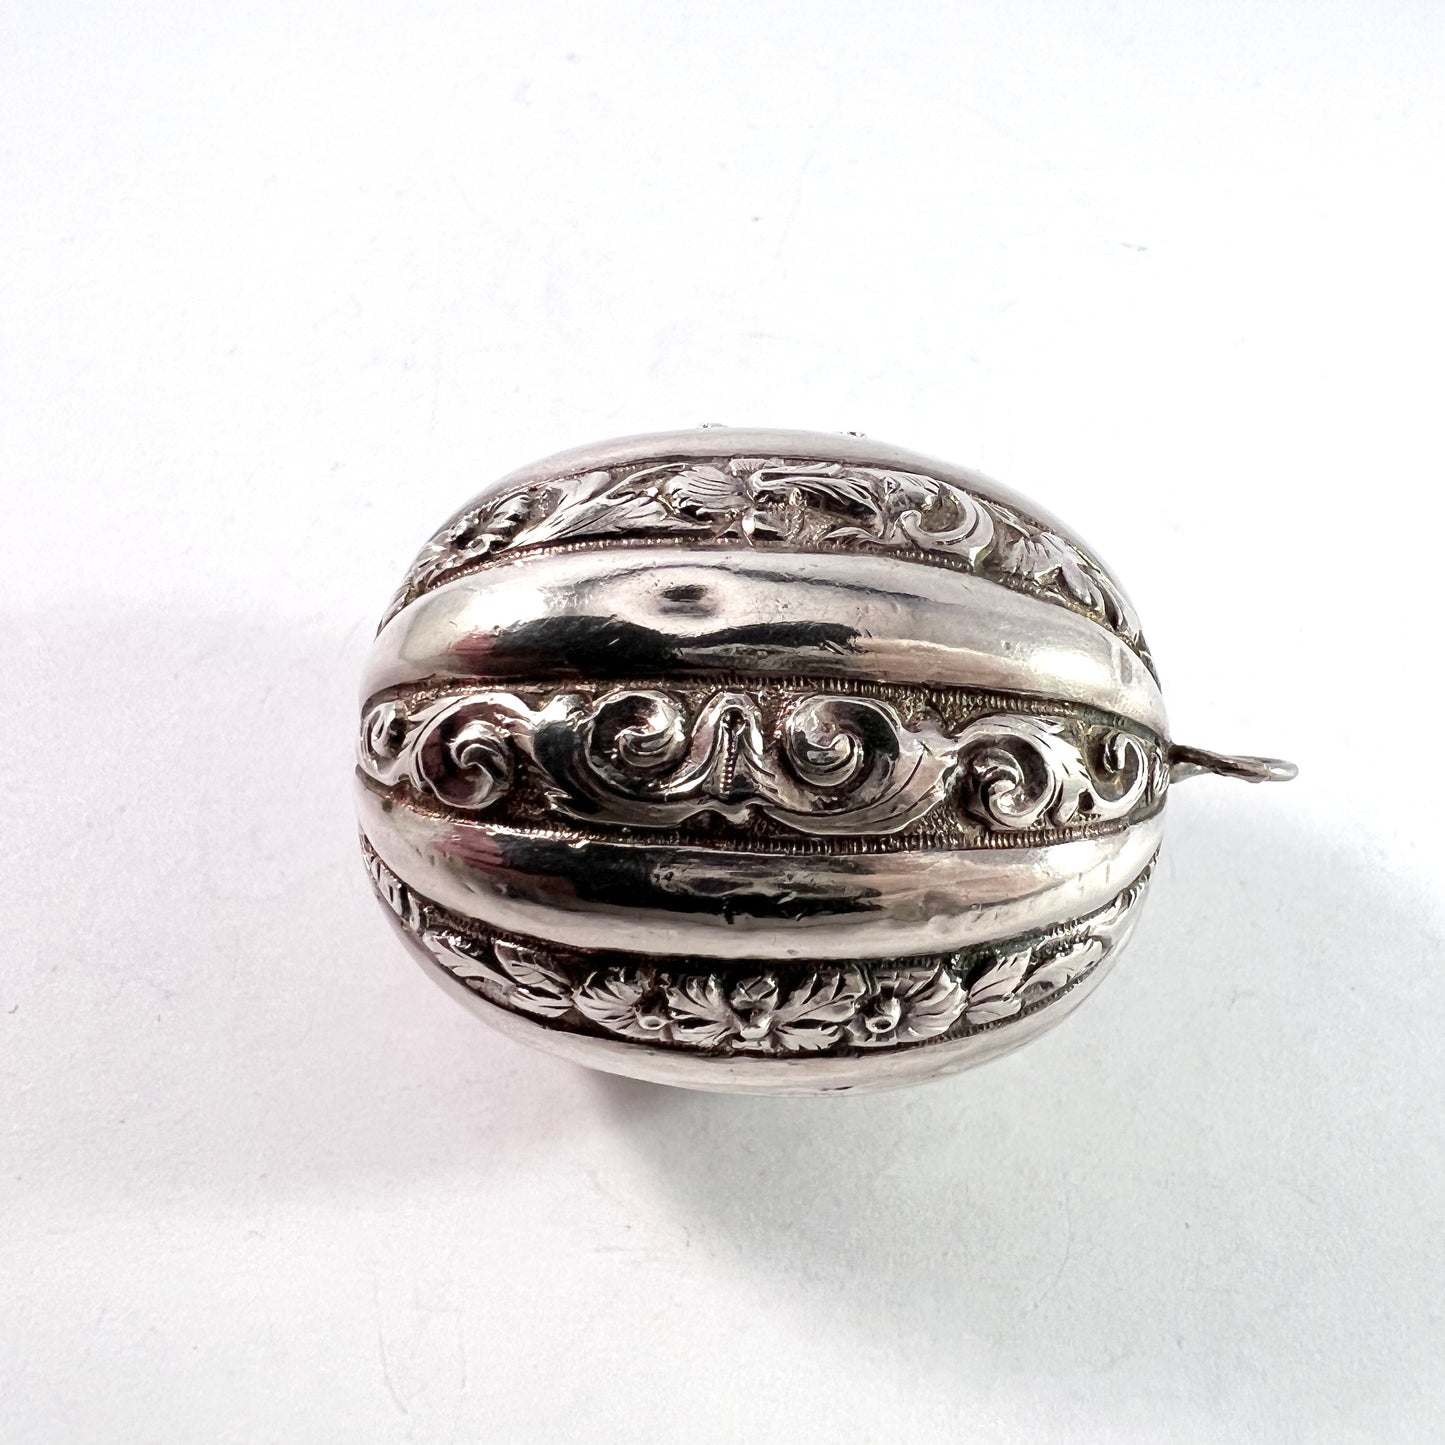 Interesting Georgian or early Victorian Hand Chased Silver Plated Closed Compartment Heavy Pendant.